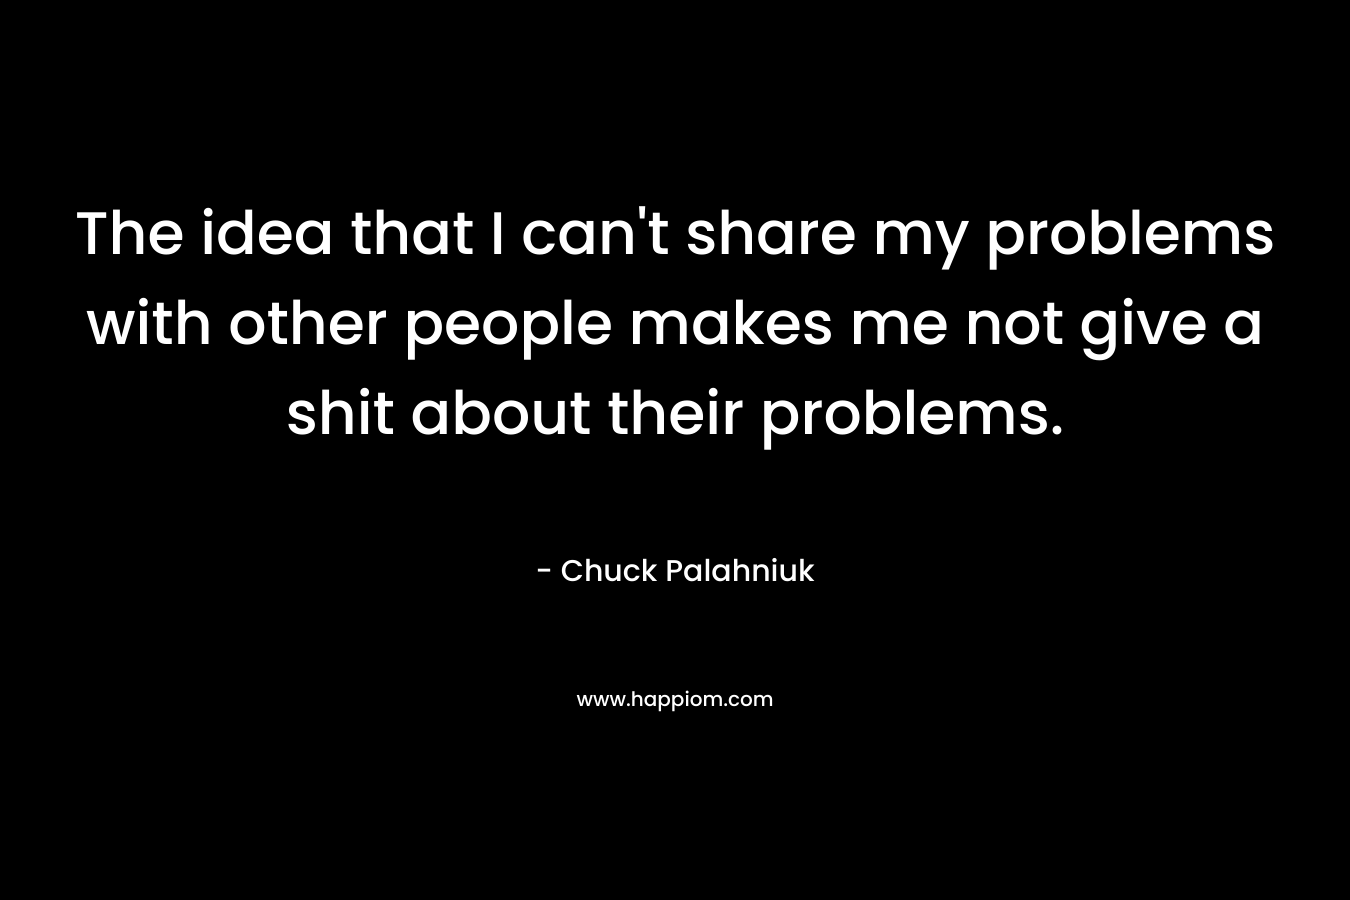 The idea that I can't share my problems with other people makes me not give a shit about their problems.